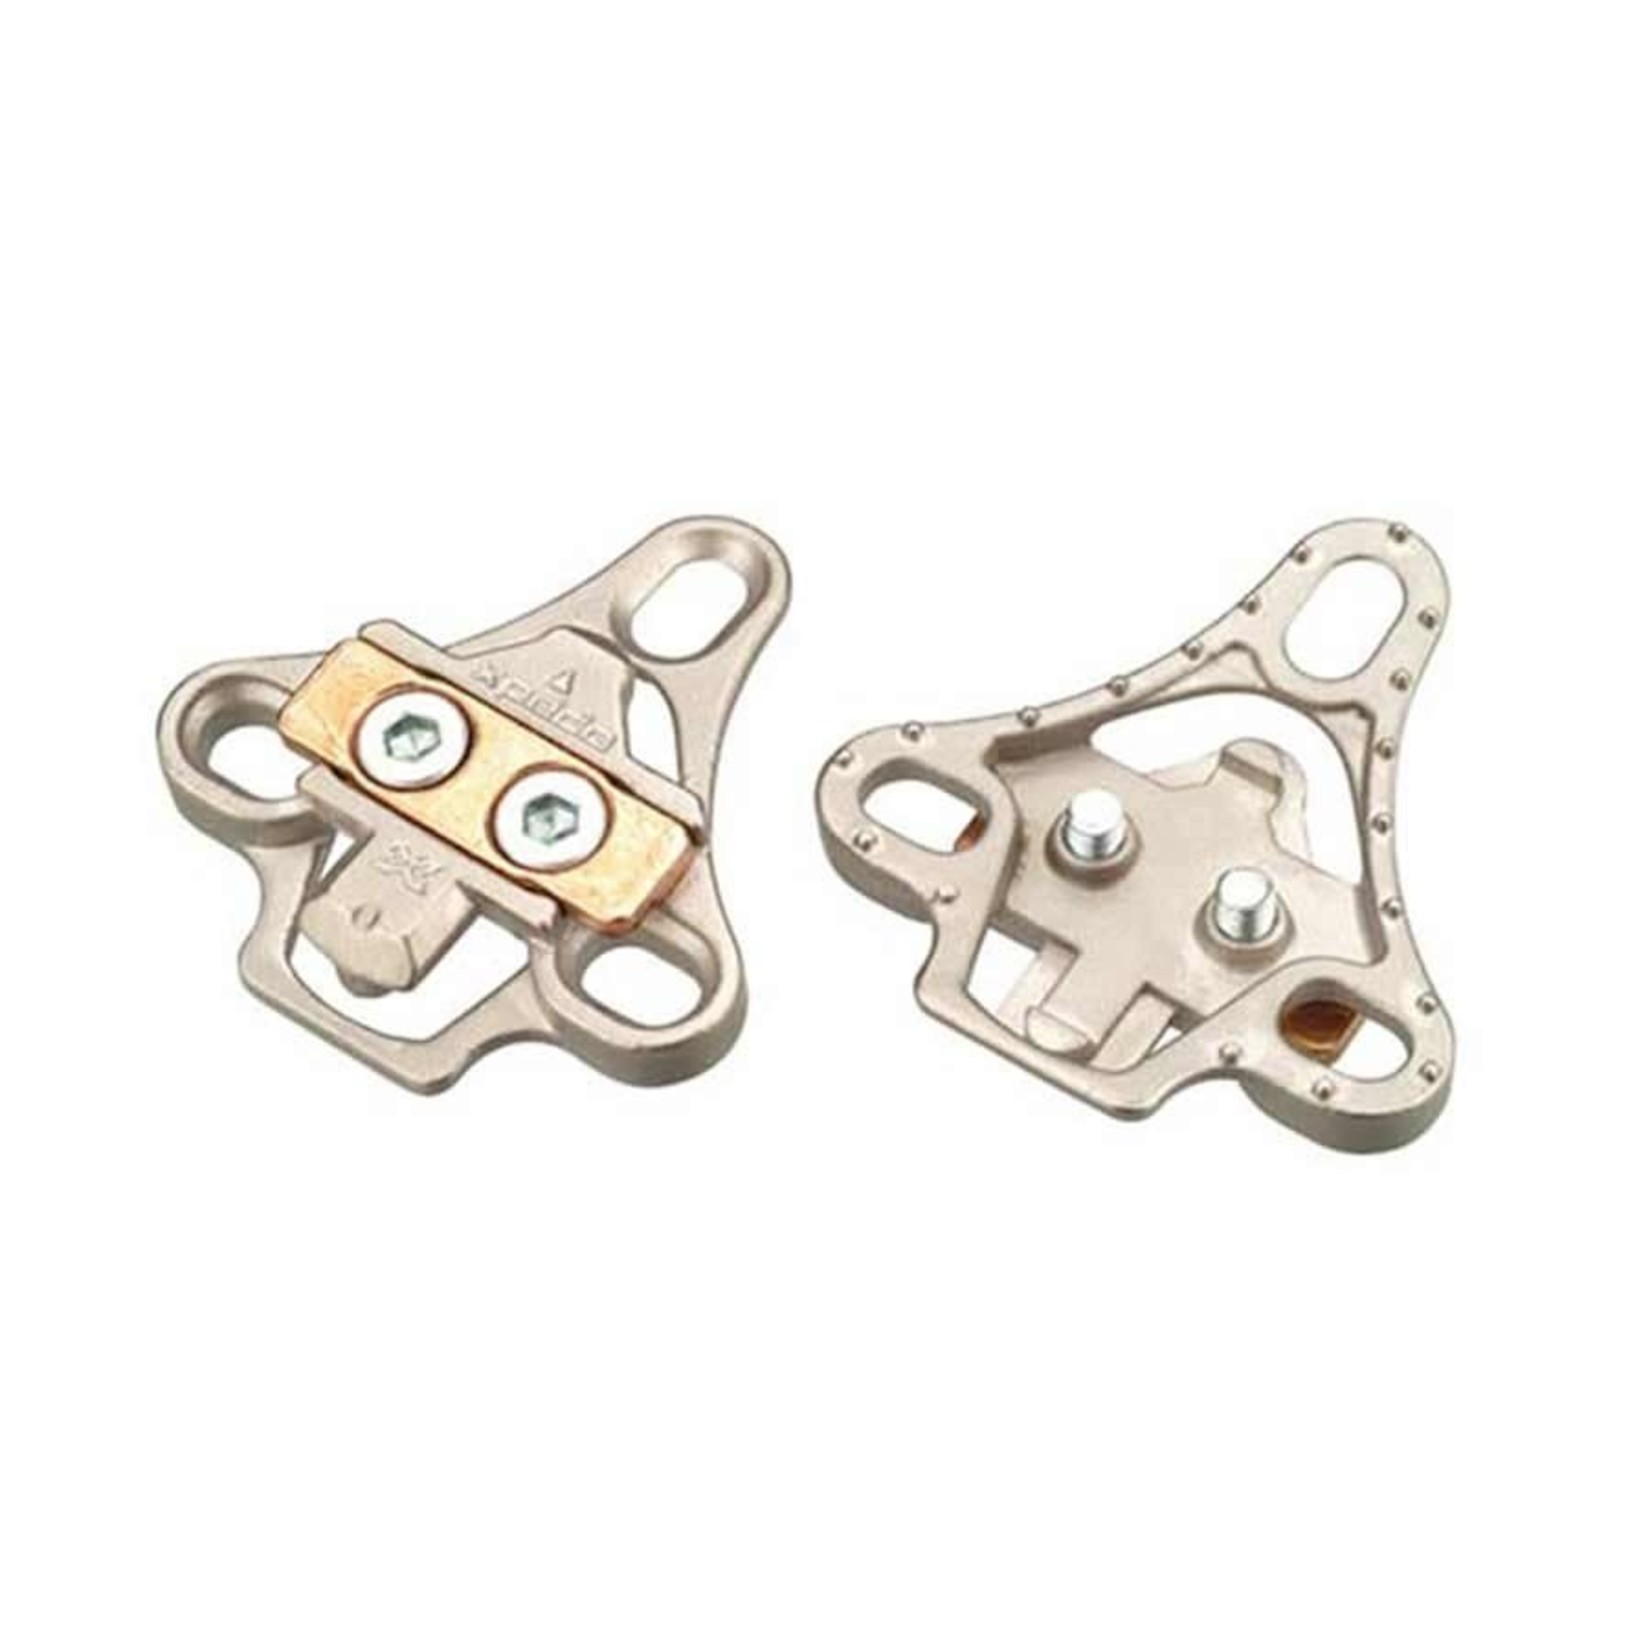 Varia Wellgo, Varia, SPD Cleats For Look System ( 3 Holes ) Adapter